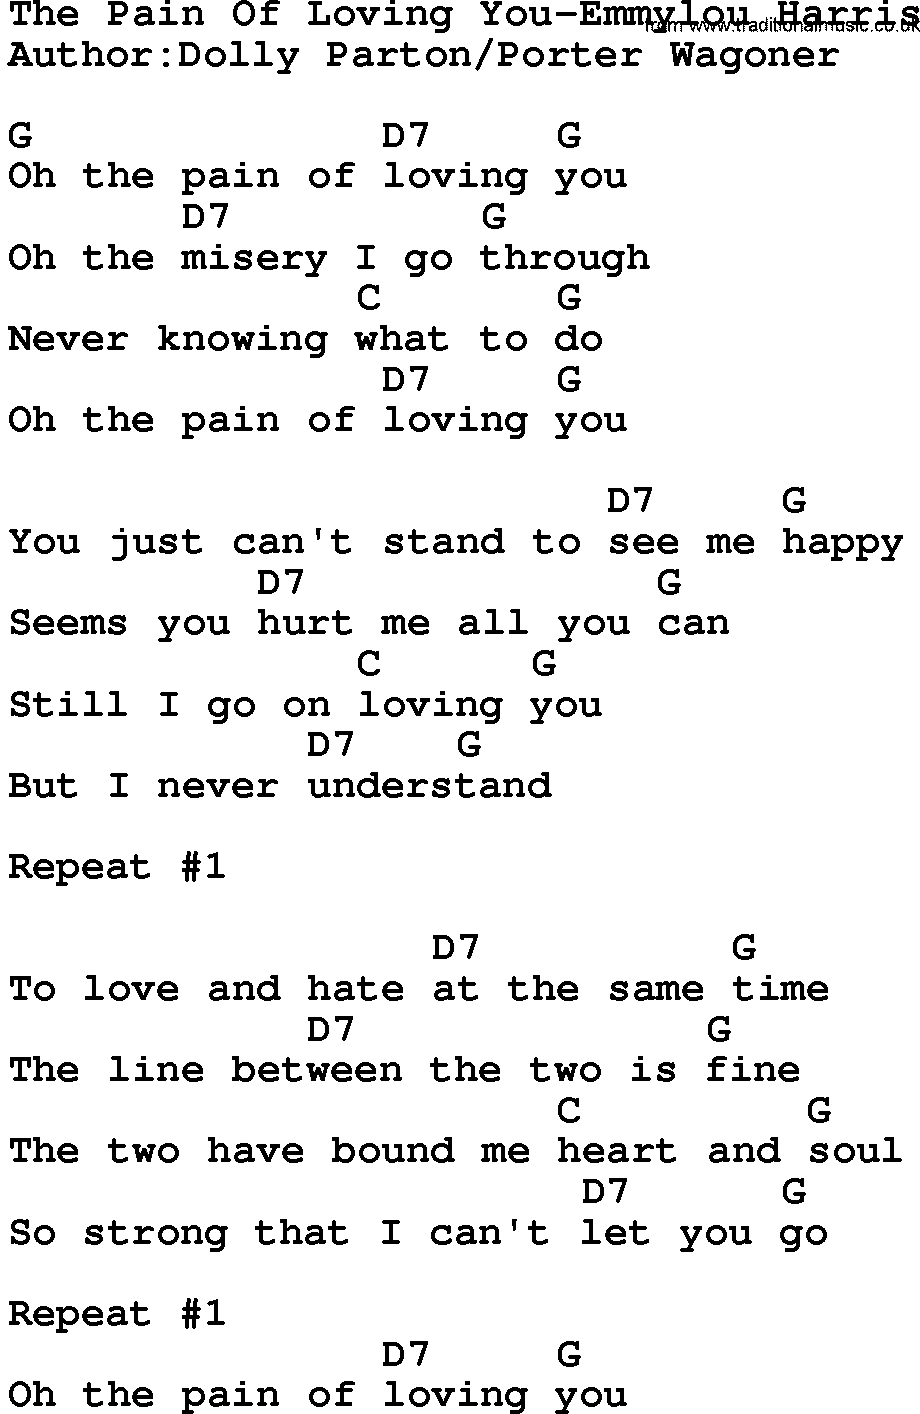 Country music song: The Pain Of Loving You-Emmylou Harris lyrics and chords